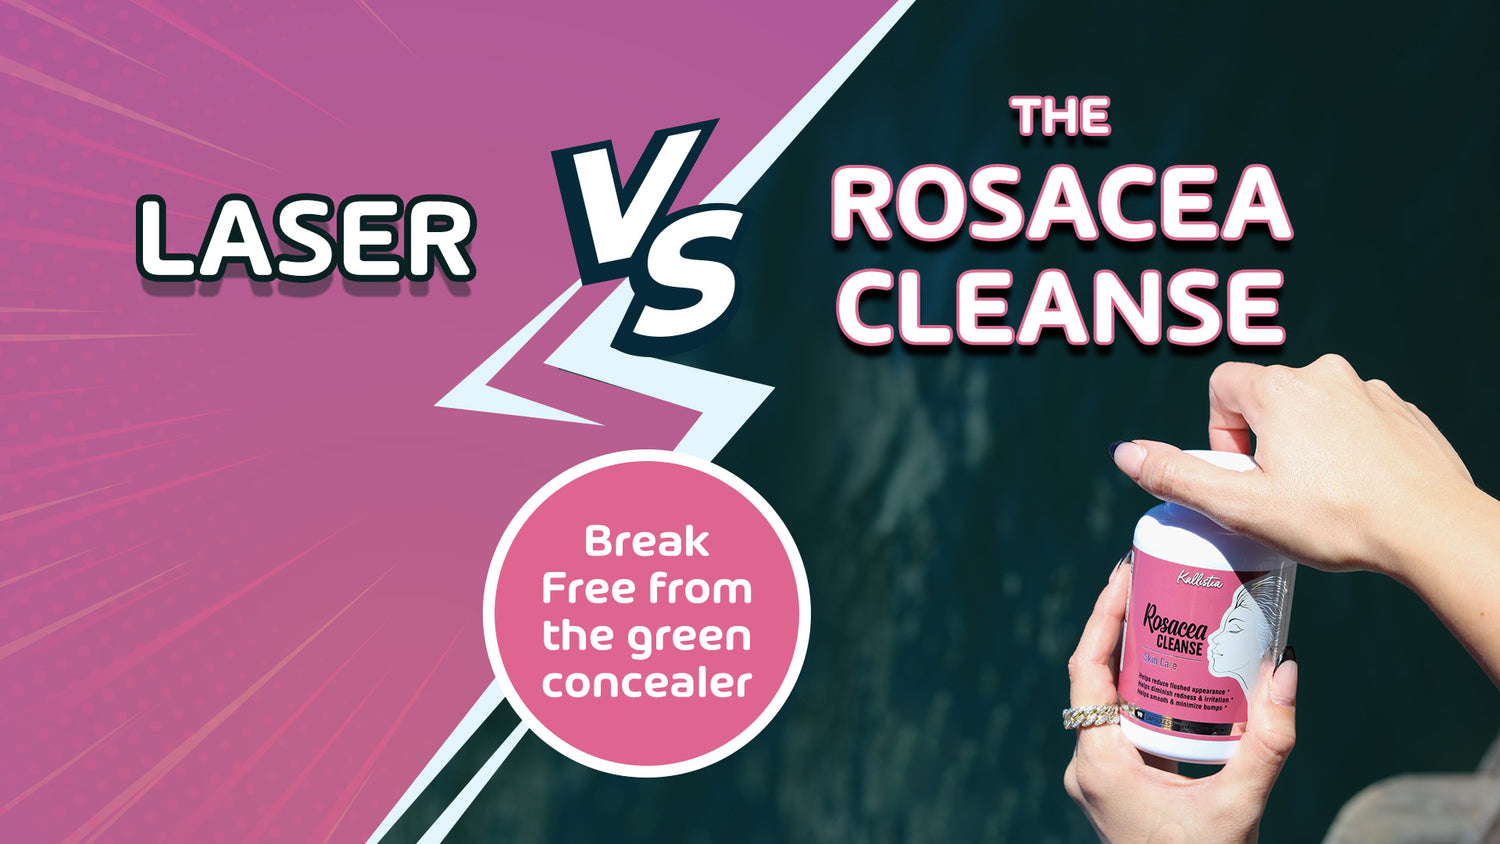 Laser vs The Rosacea Cleanse. Break Free from the green concealer!